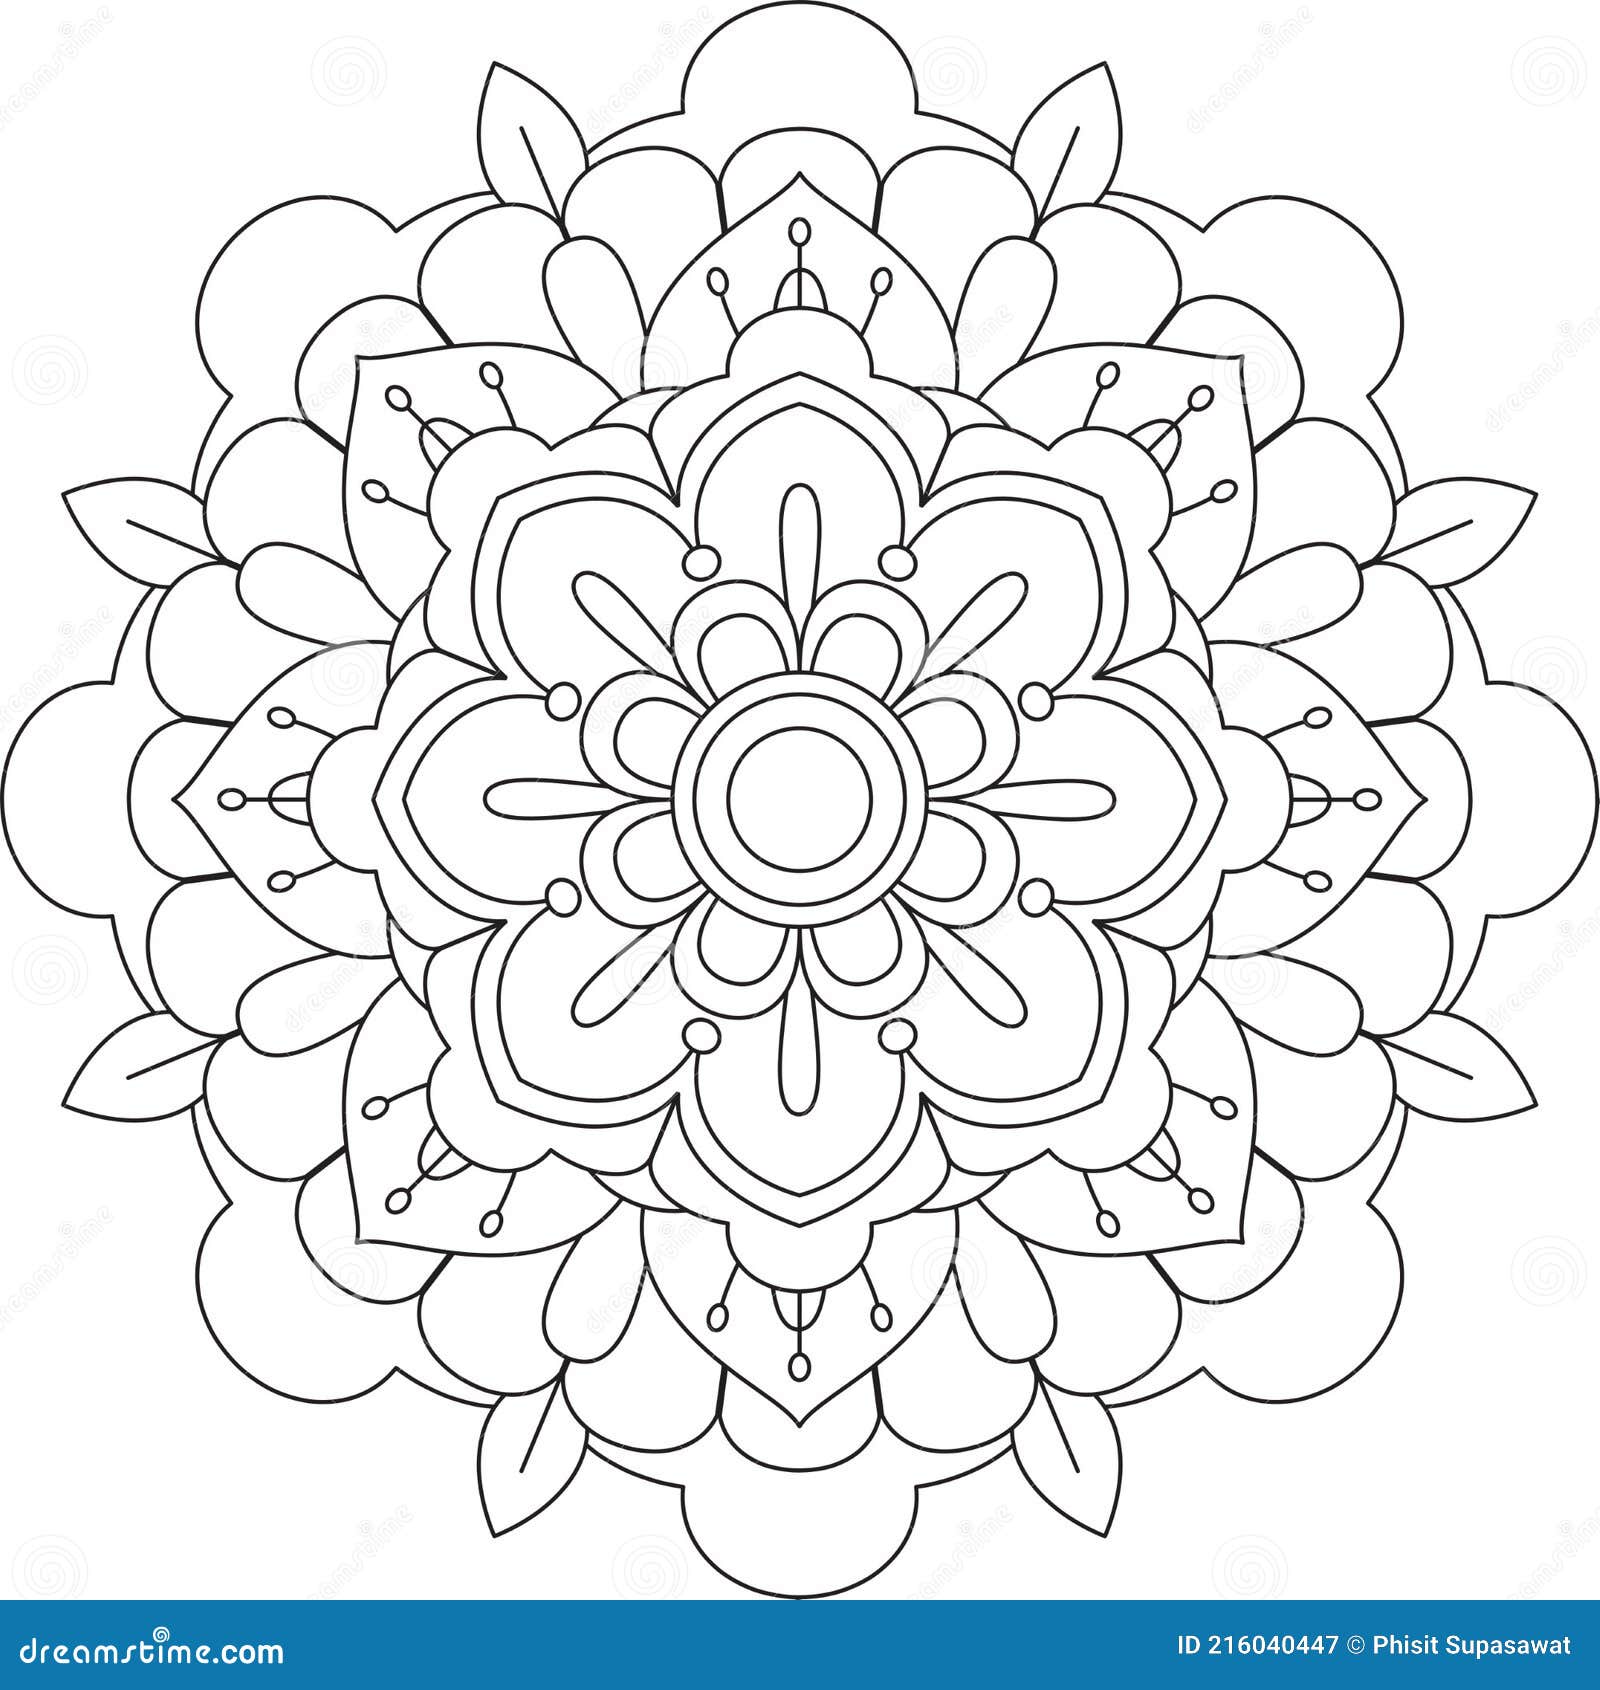 Simple Mandala Circle Coloring Page for Adult, Children Stock ...